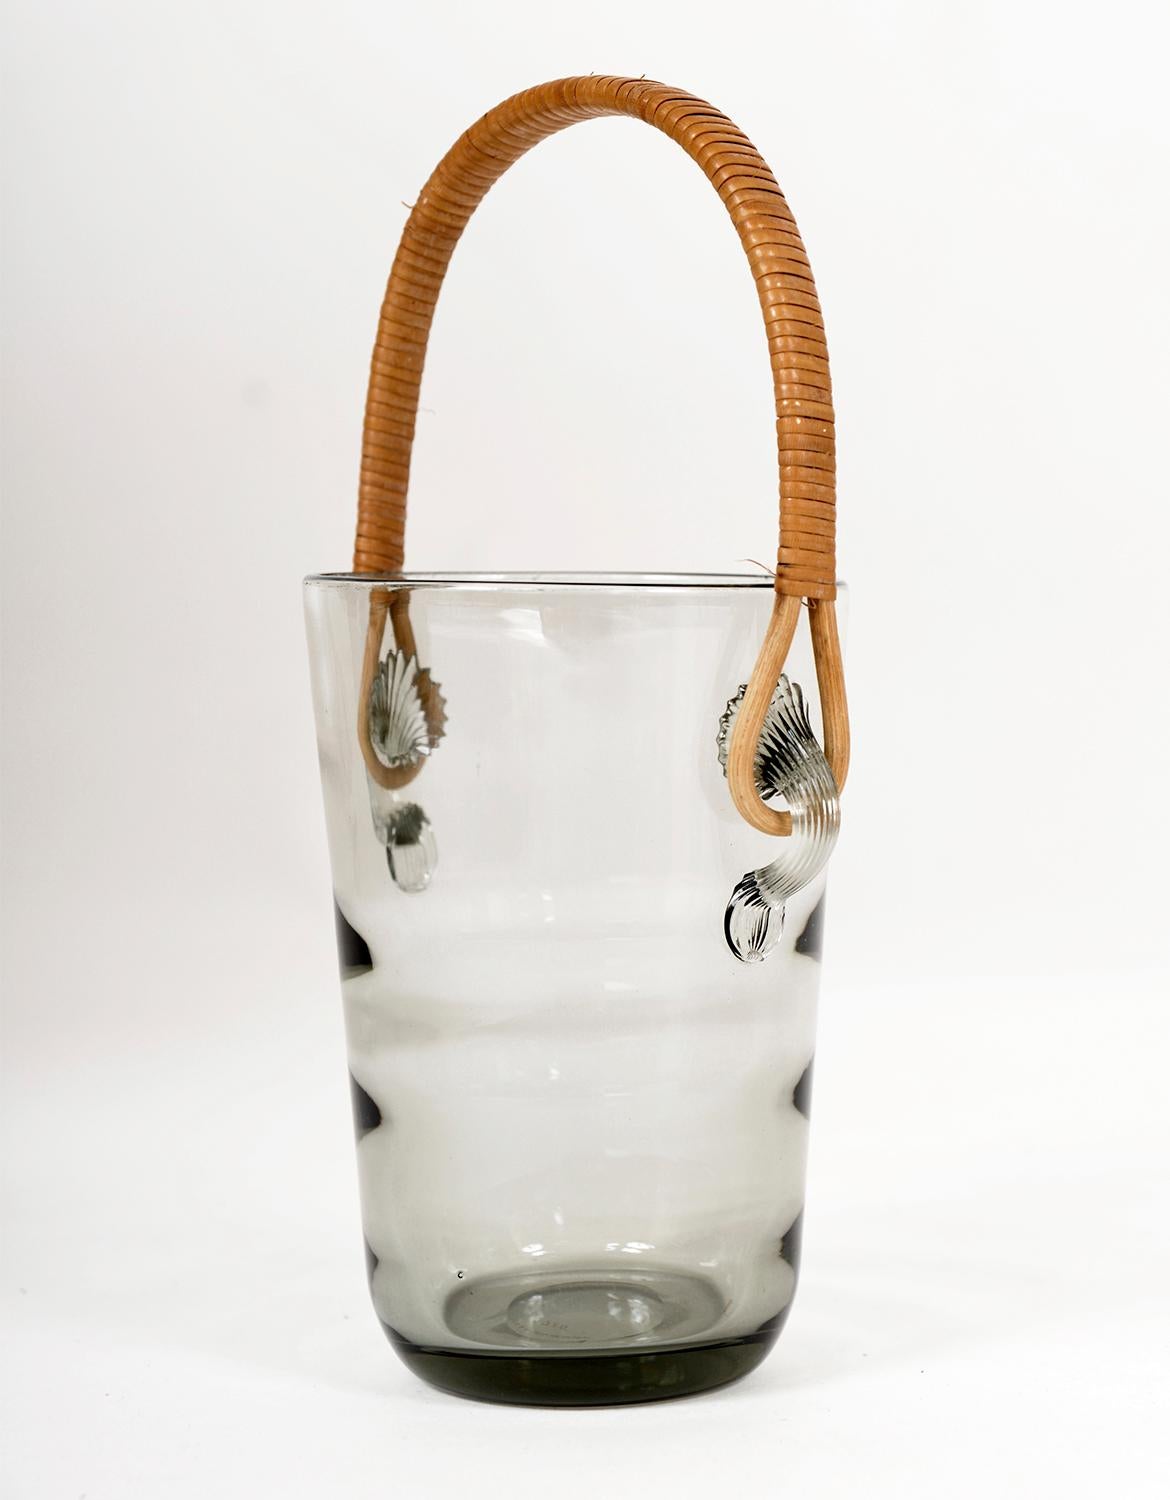 Per Lutken designed this very stylish “Akva” ice bucket with a slightly ribbed smoked glass pattern and an elegant rattan handle. 
Made by the famous Danish glassmakers Holmegaard in the late 1950s, early 60s, it carries the maker’s mark 